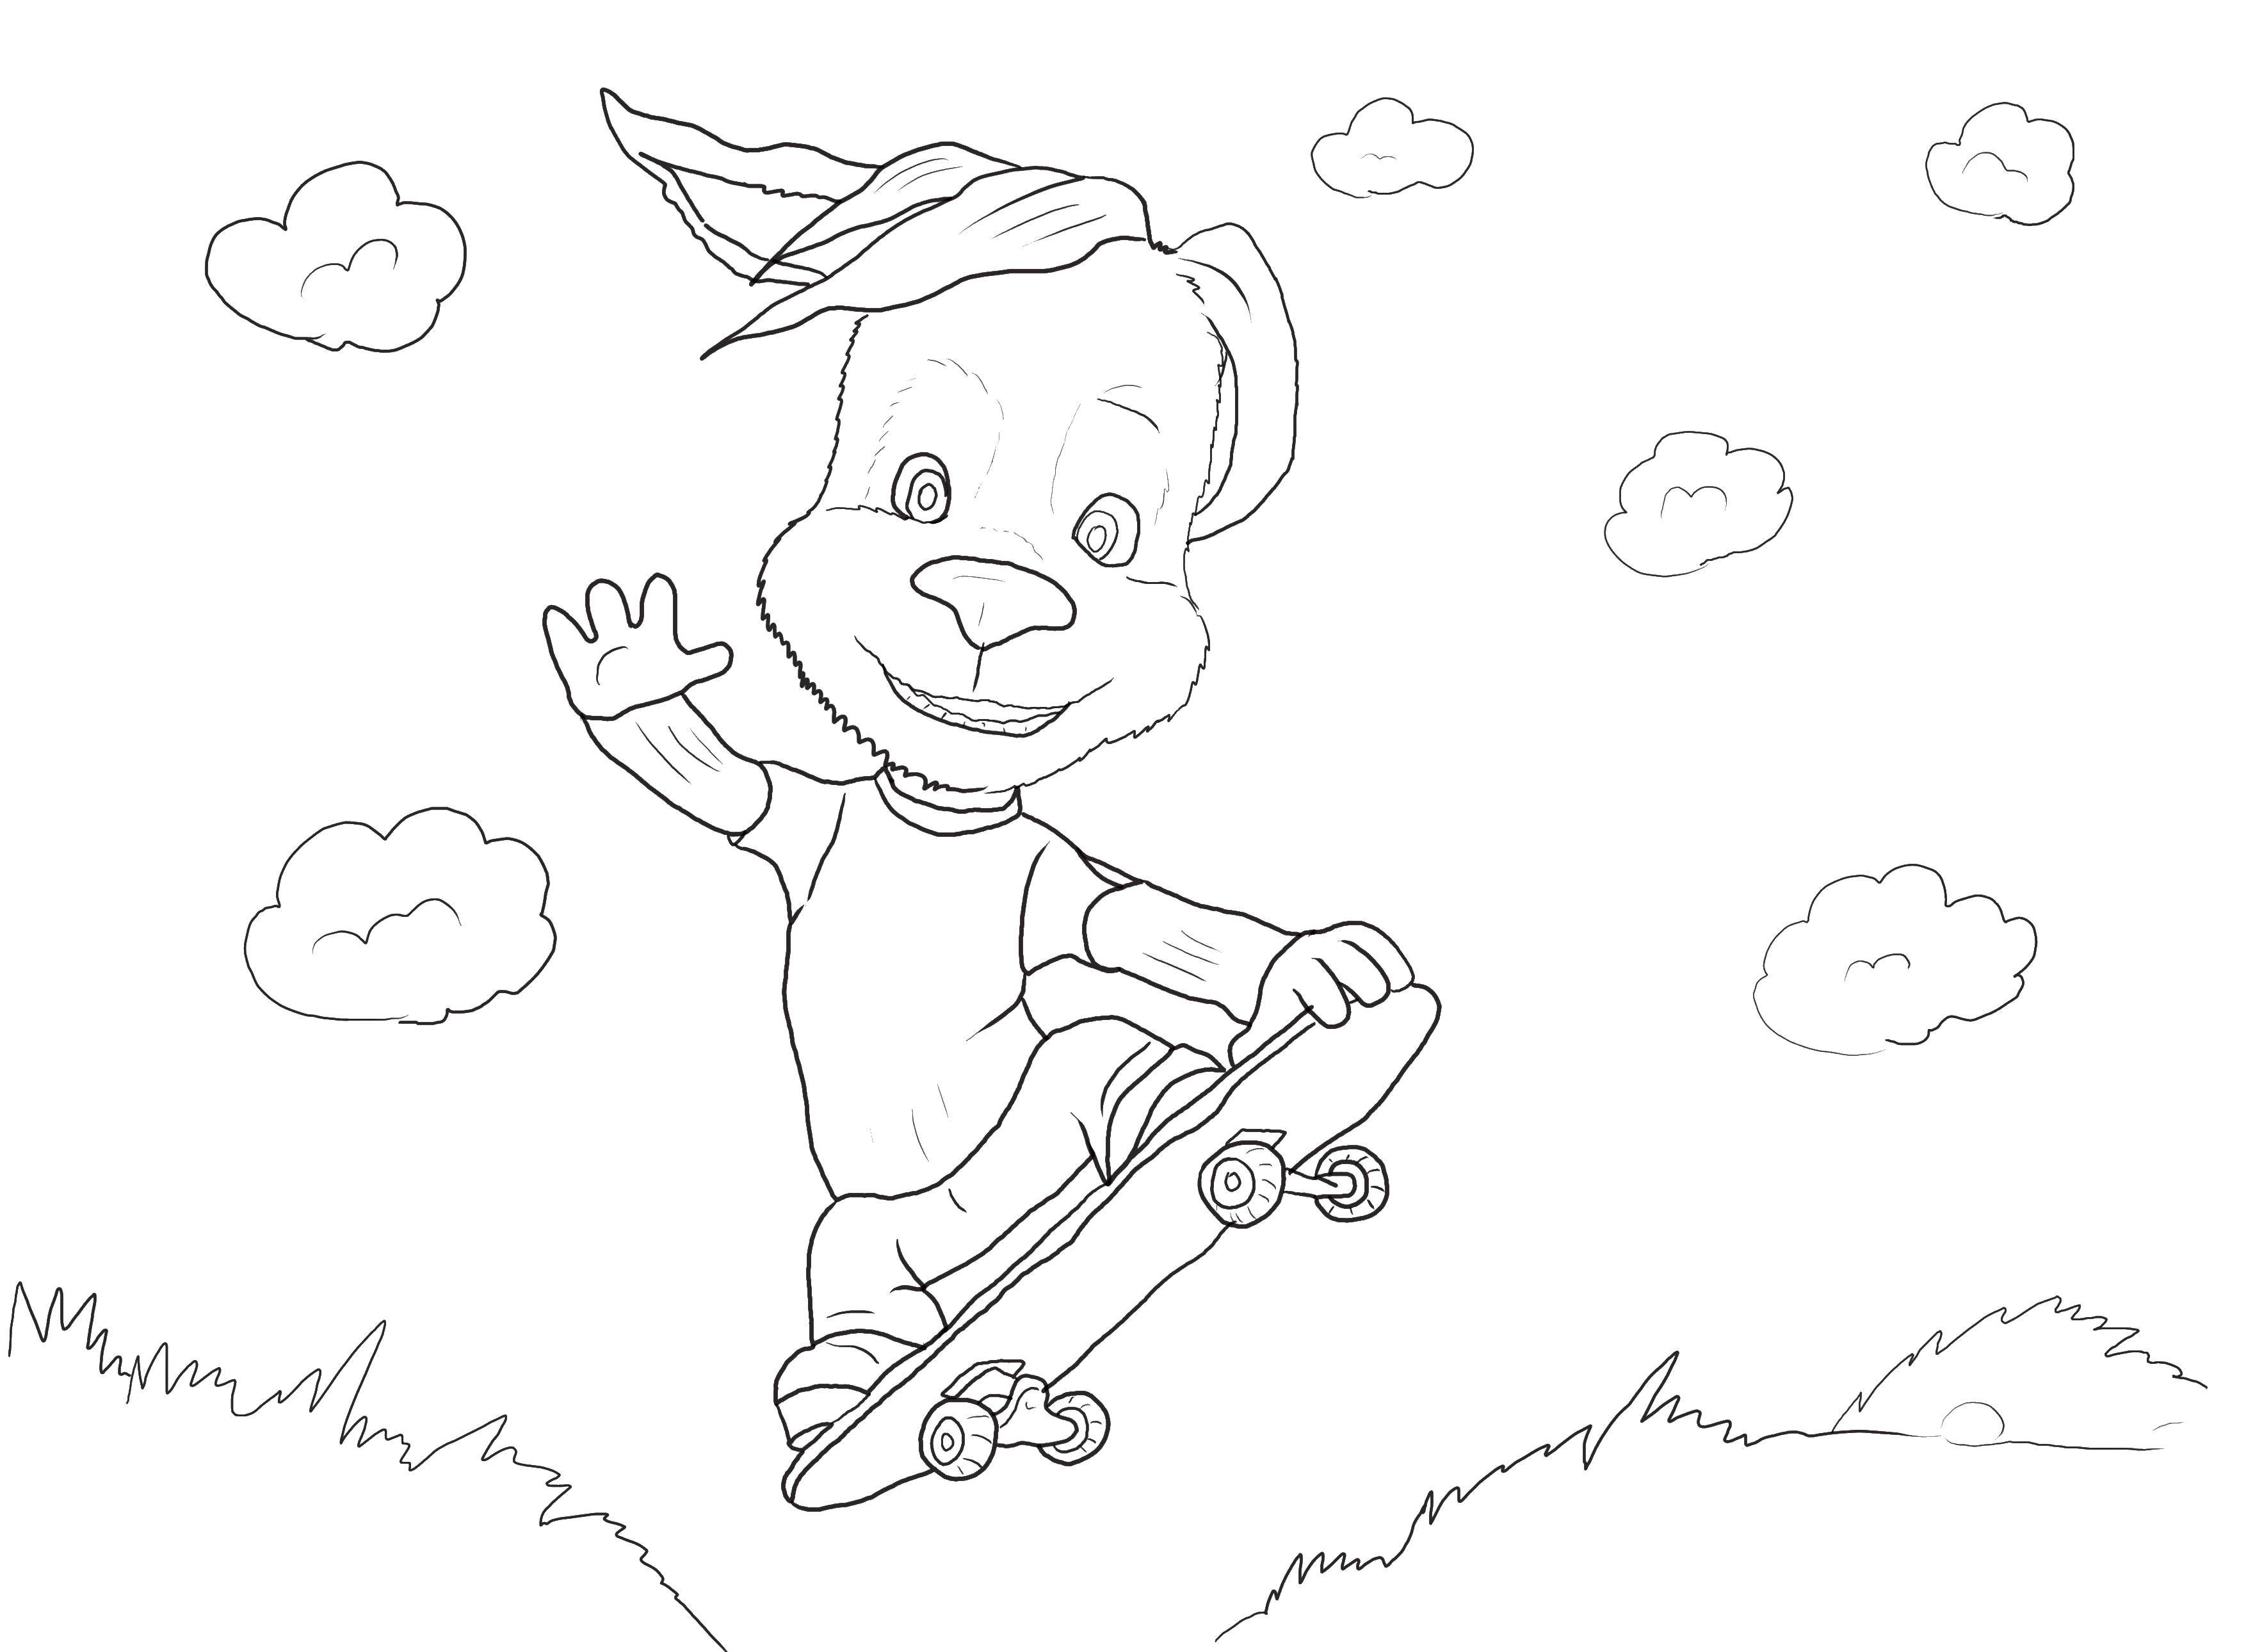 Coloring Dog on a skateboard. Category Jackson. Tags:  barboskiny, dogs, cartoons.